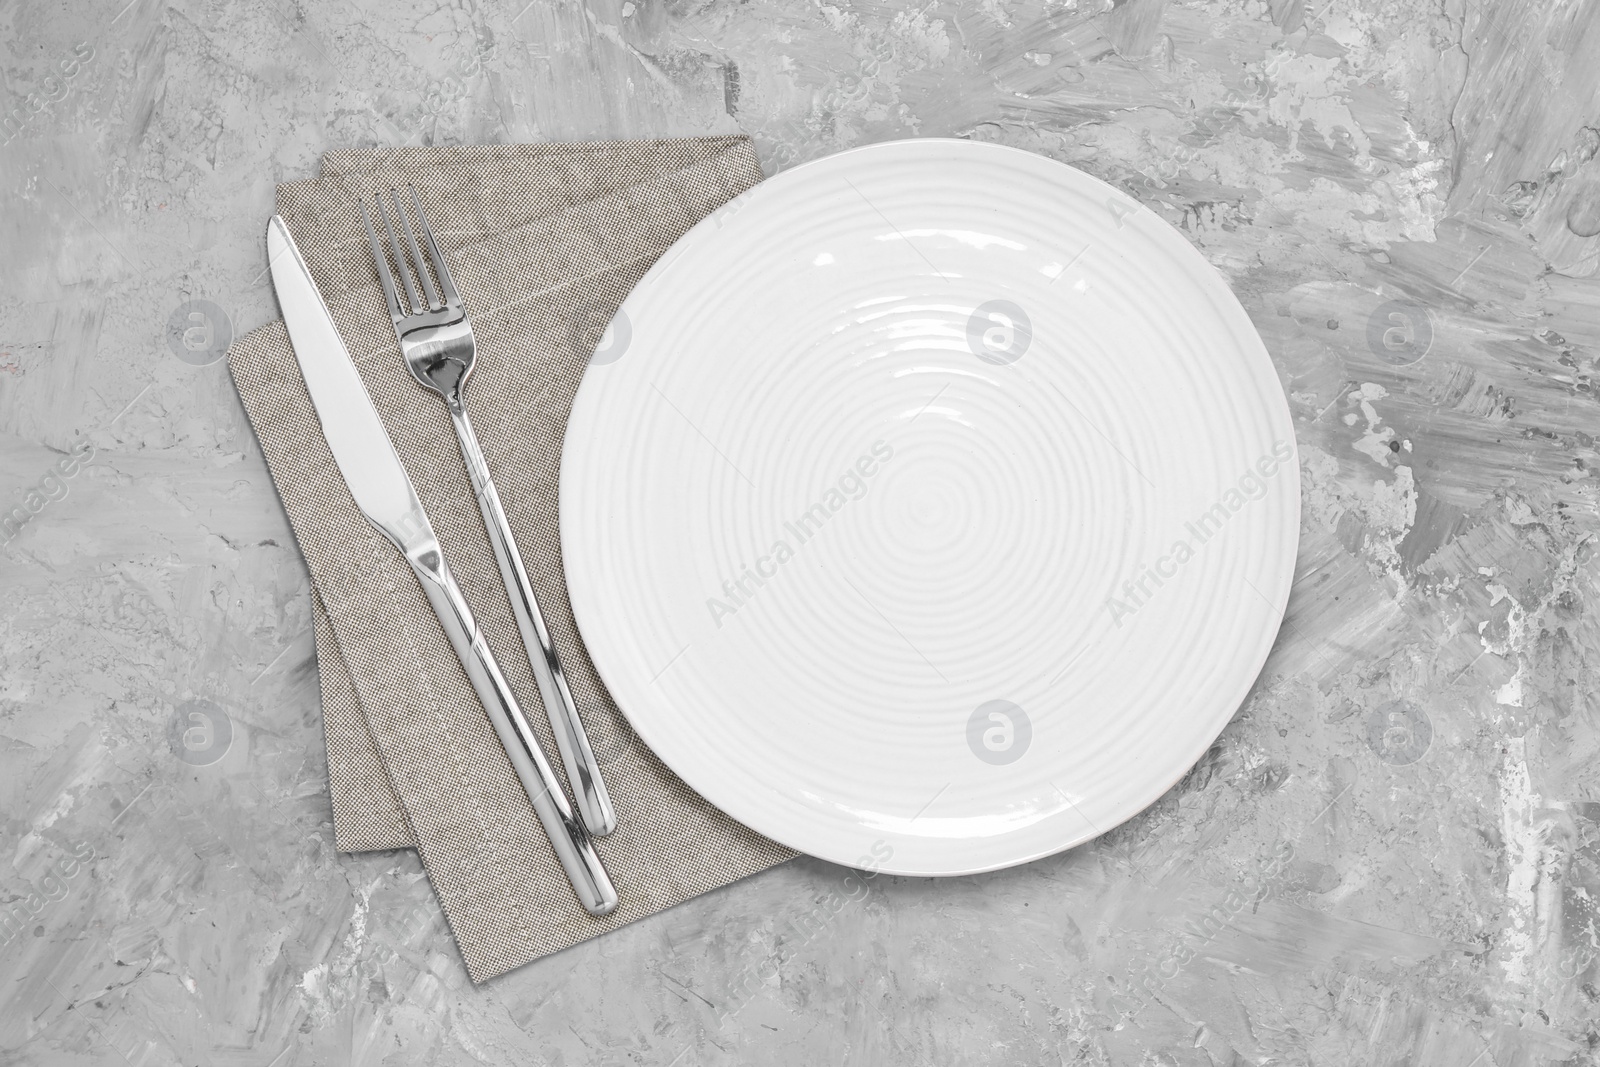 Photo of Elegant setting with shiny cutlery on grey table, top view